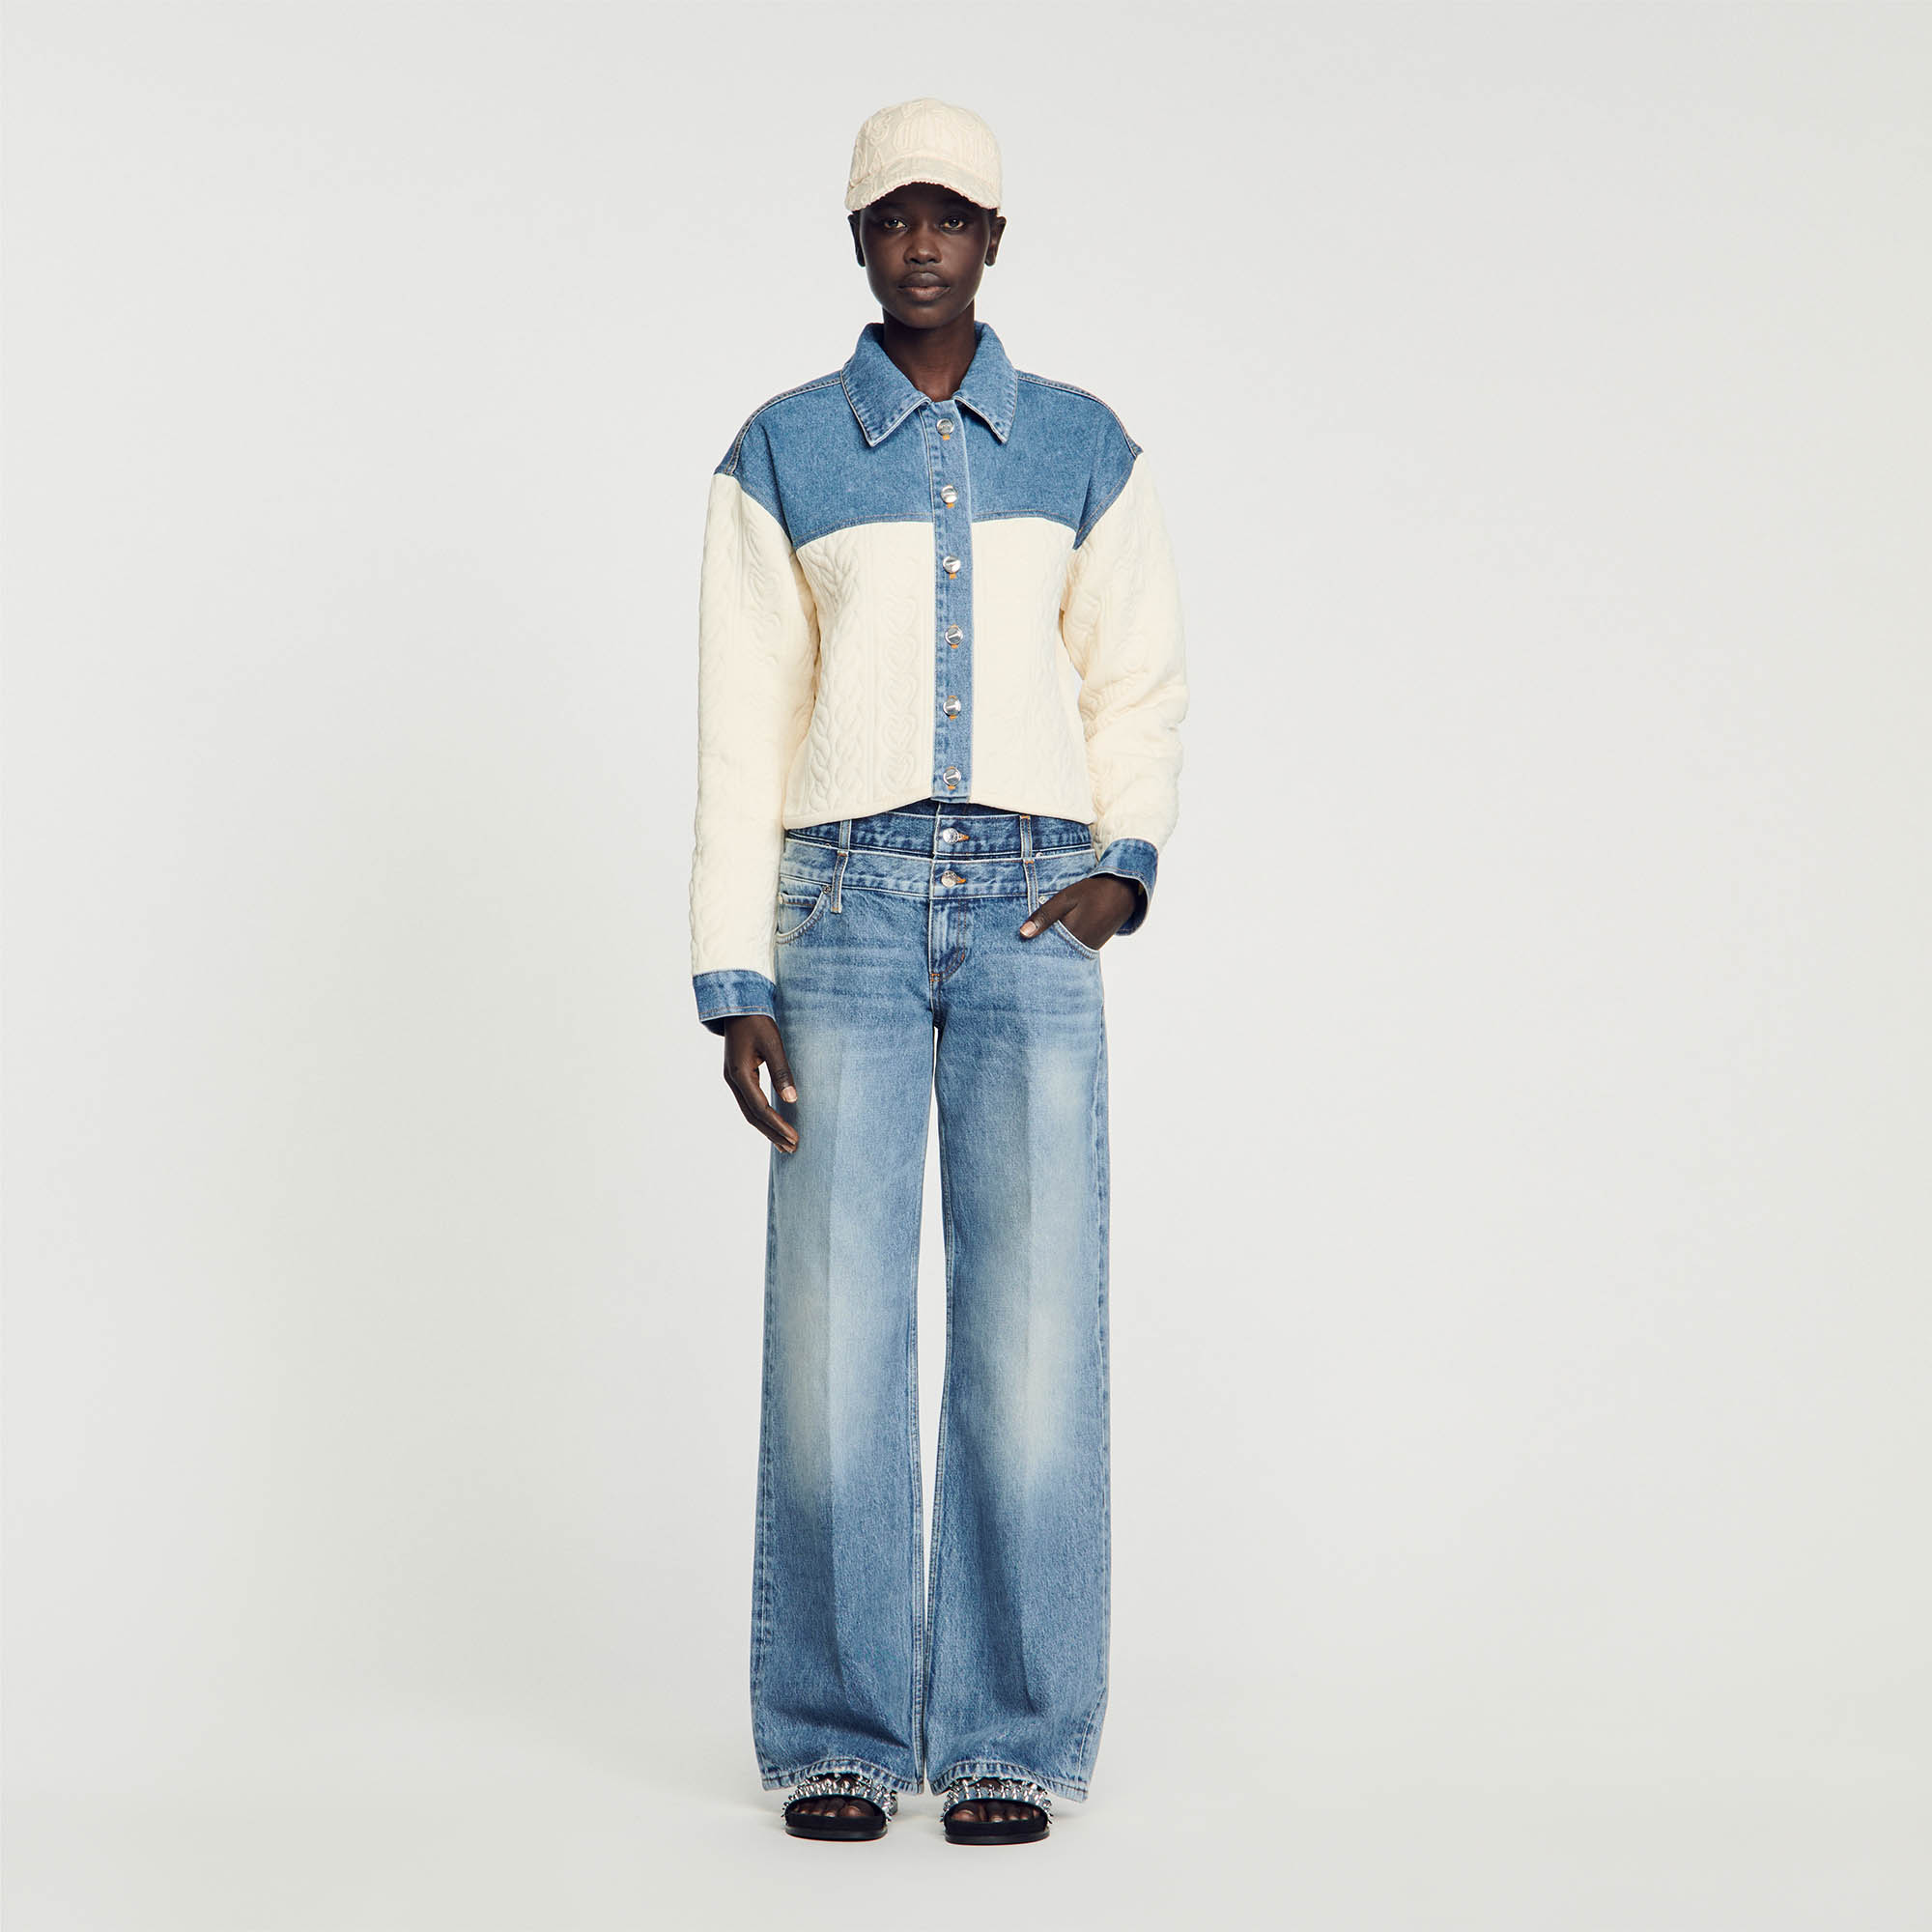 Sandro polyamide Cropped dual-material coatigan with denim sections and padded knit inserts topstitched with heart motifs